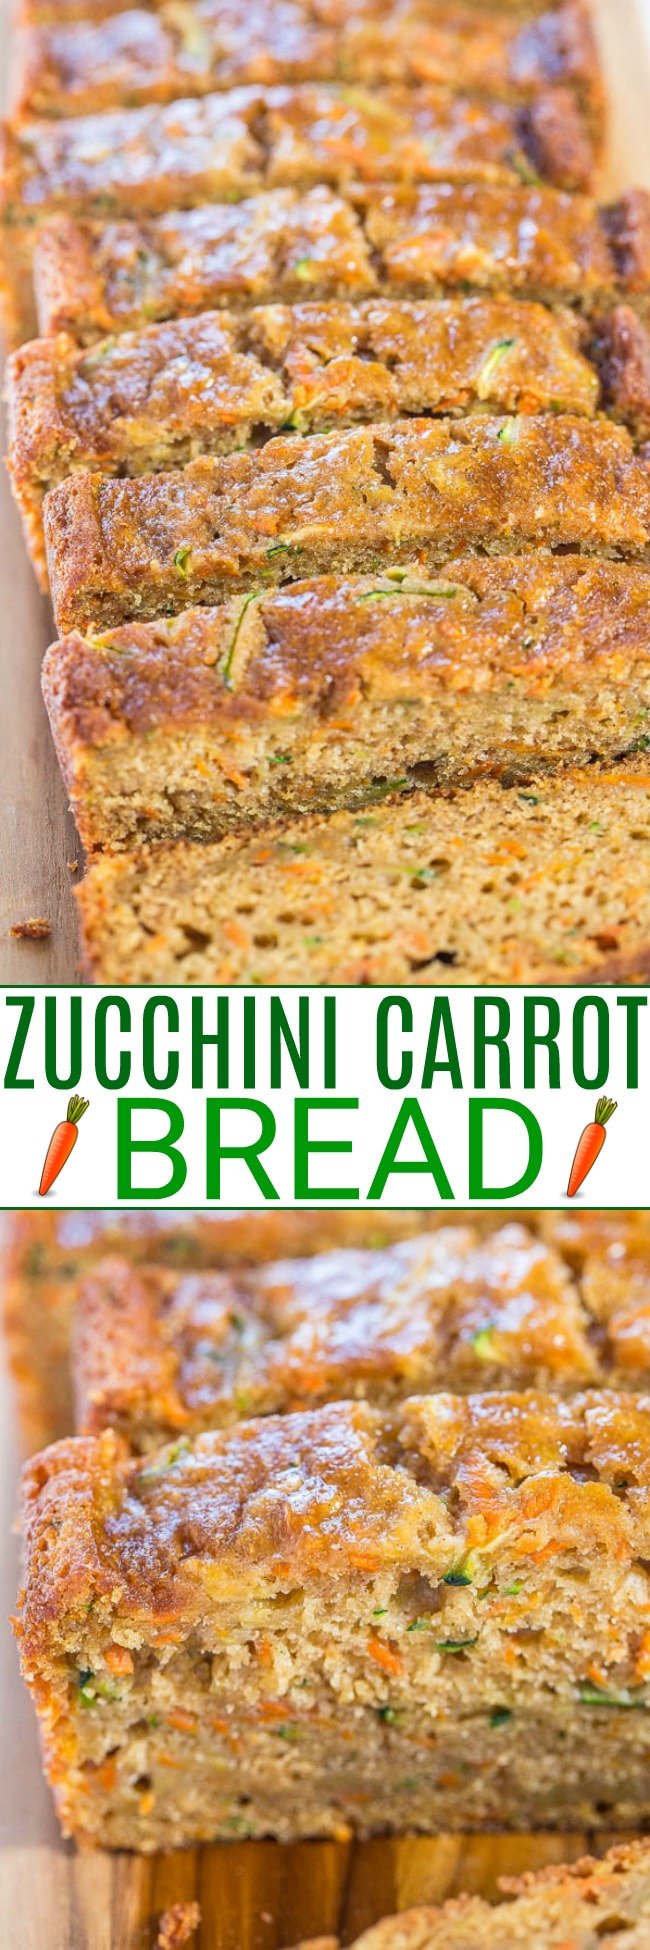 Zucchini Carrot Bread — Fast, easy, one bowl, no mixer!! Super soft, moist, and tastes so good you’ll forget it’s on the healthier side!!